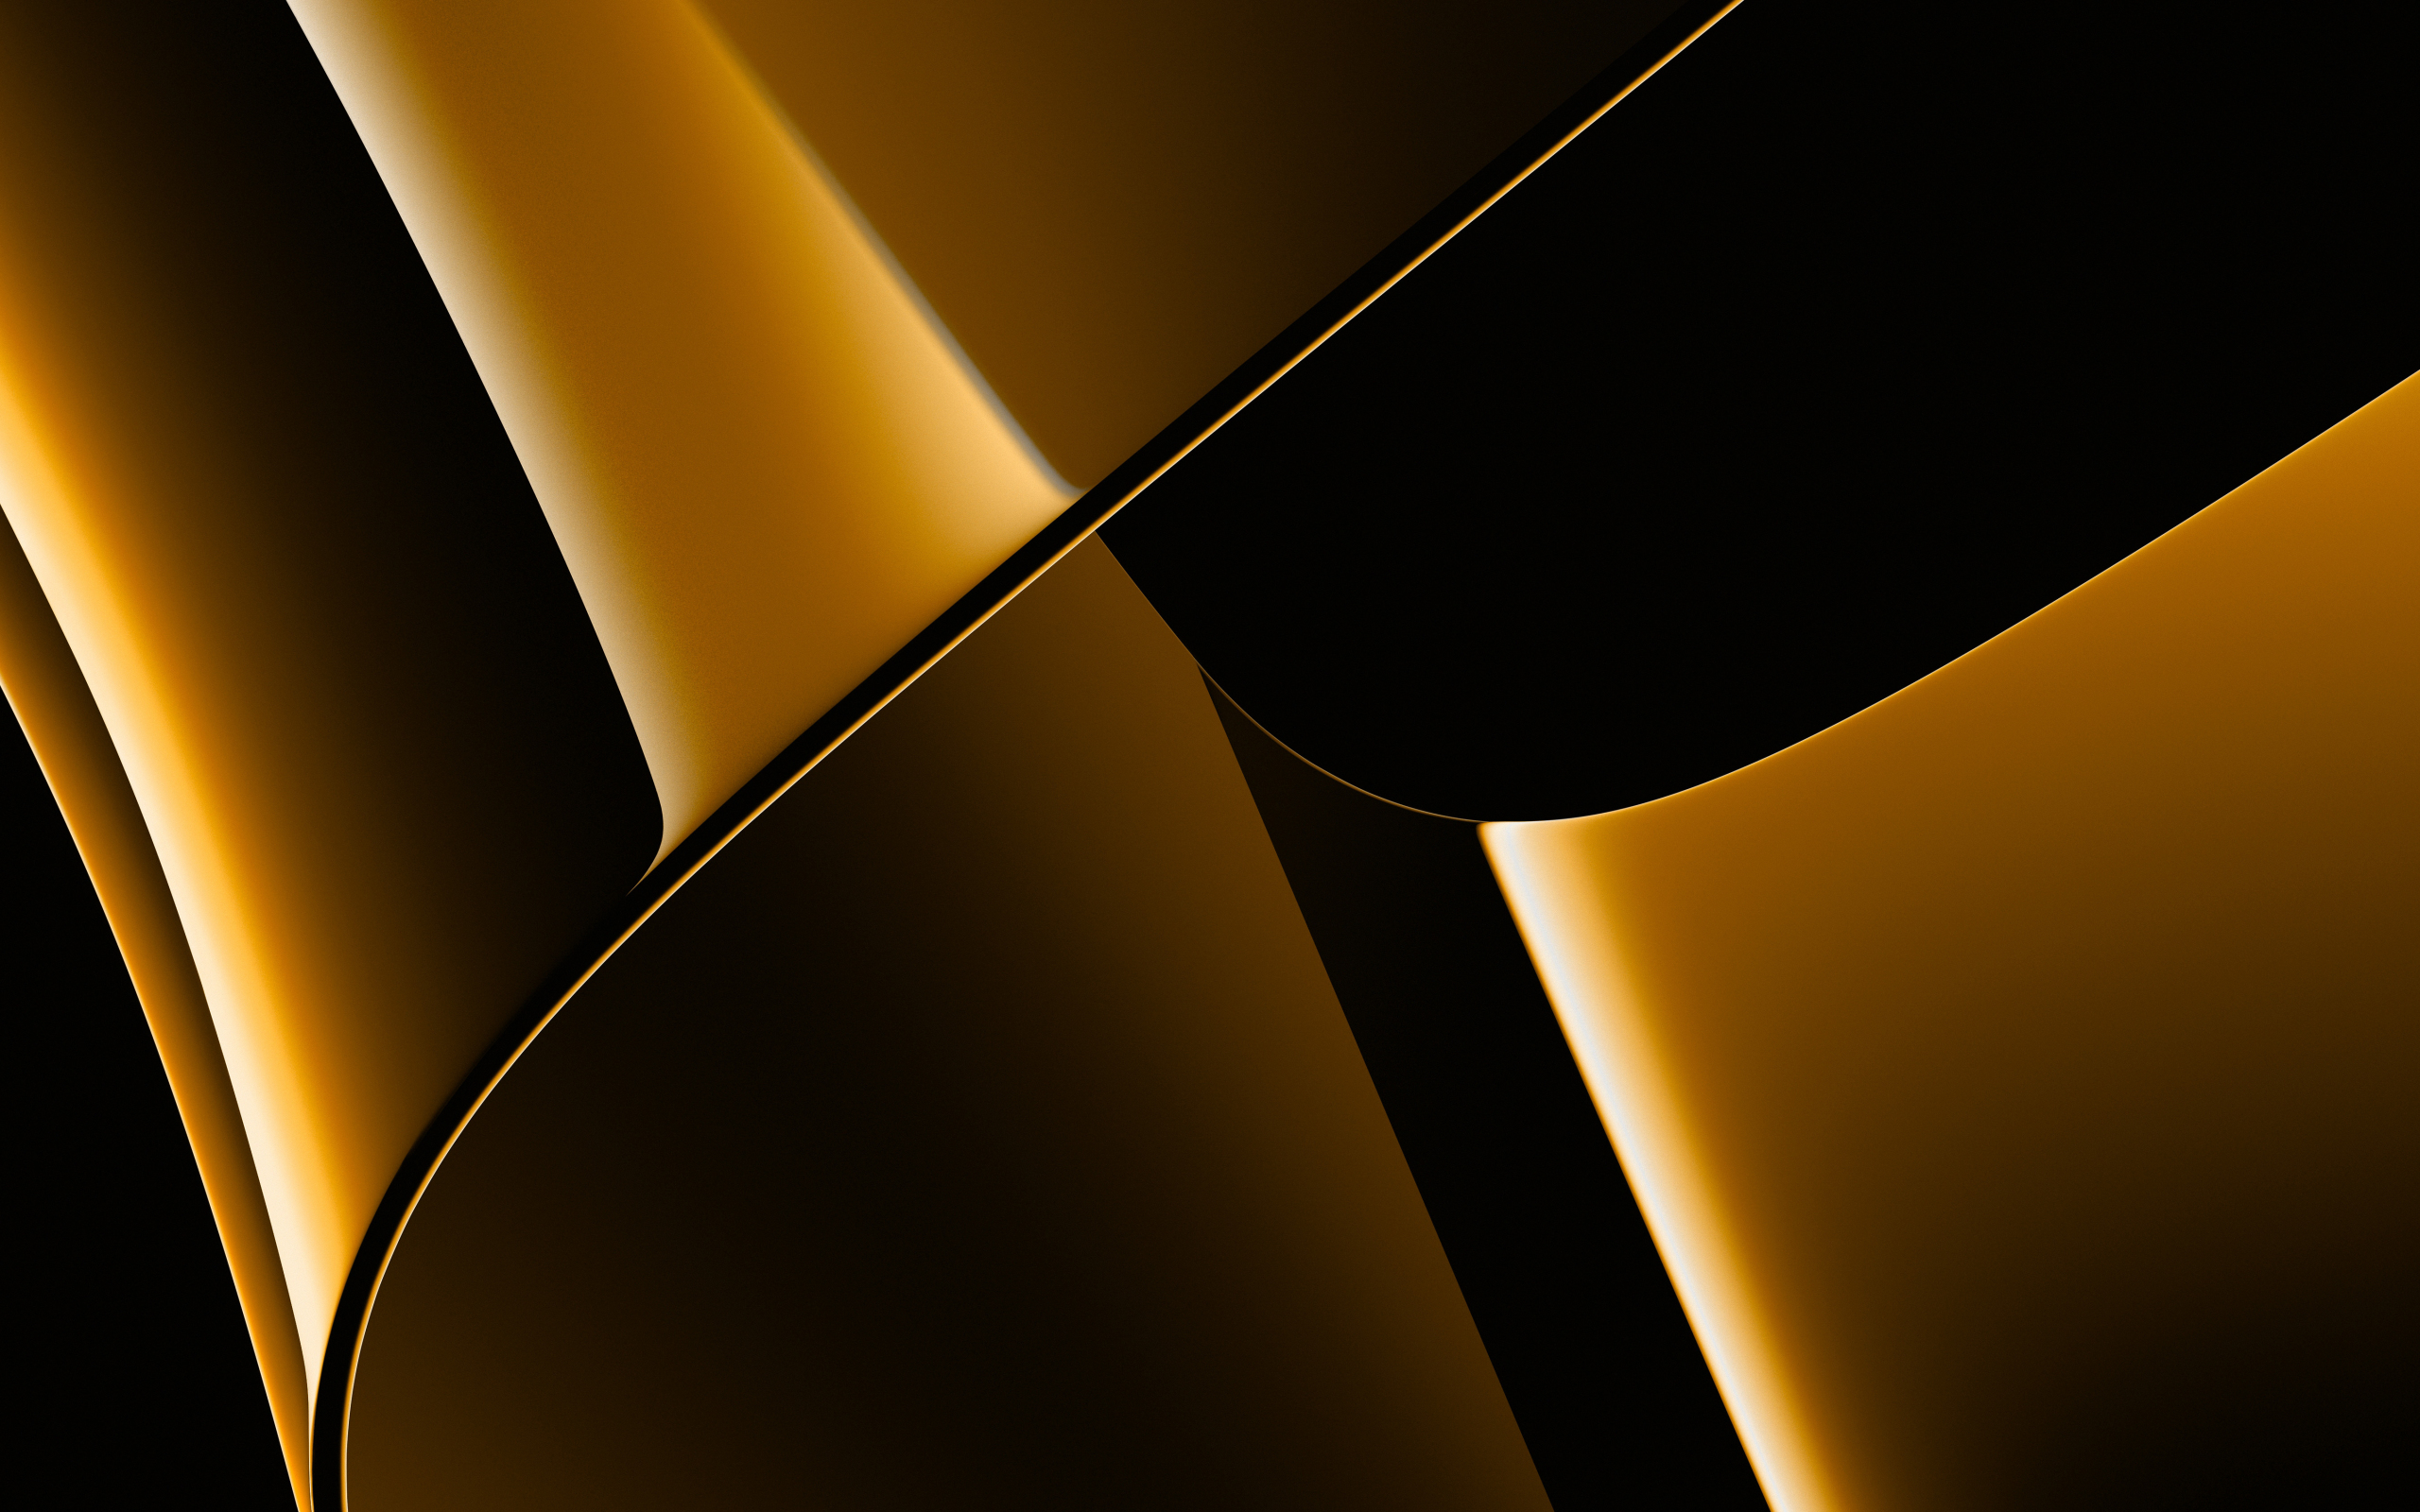 Golden surface, abstract, shapes, 2560x1600 wallpaper